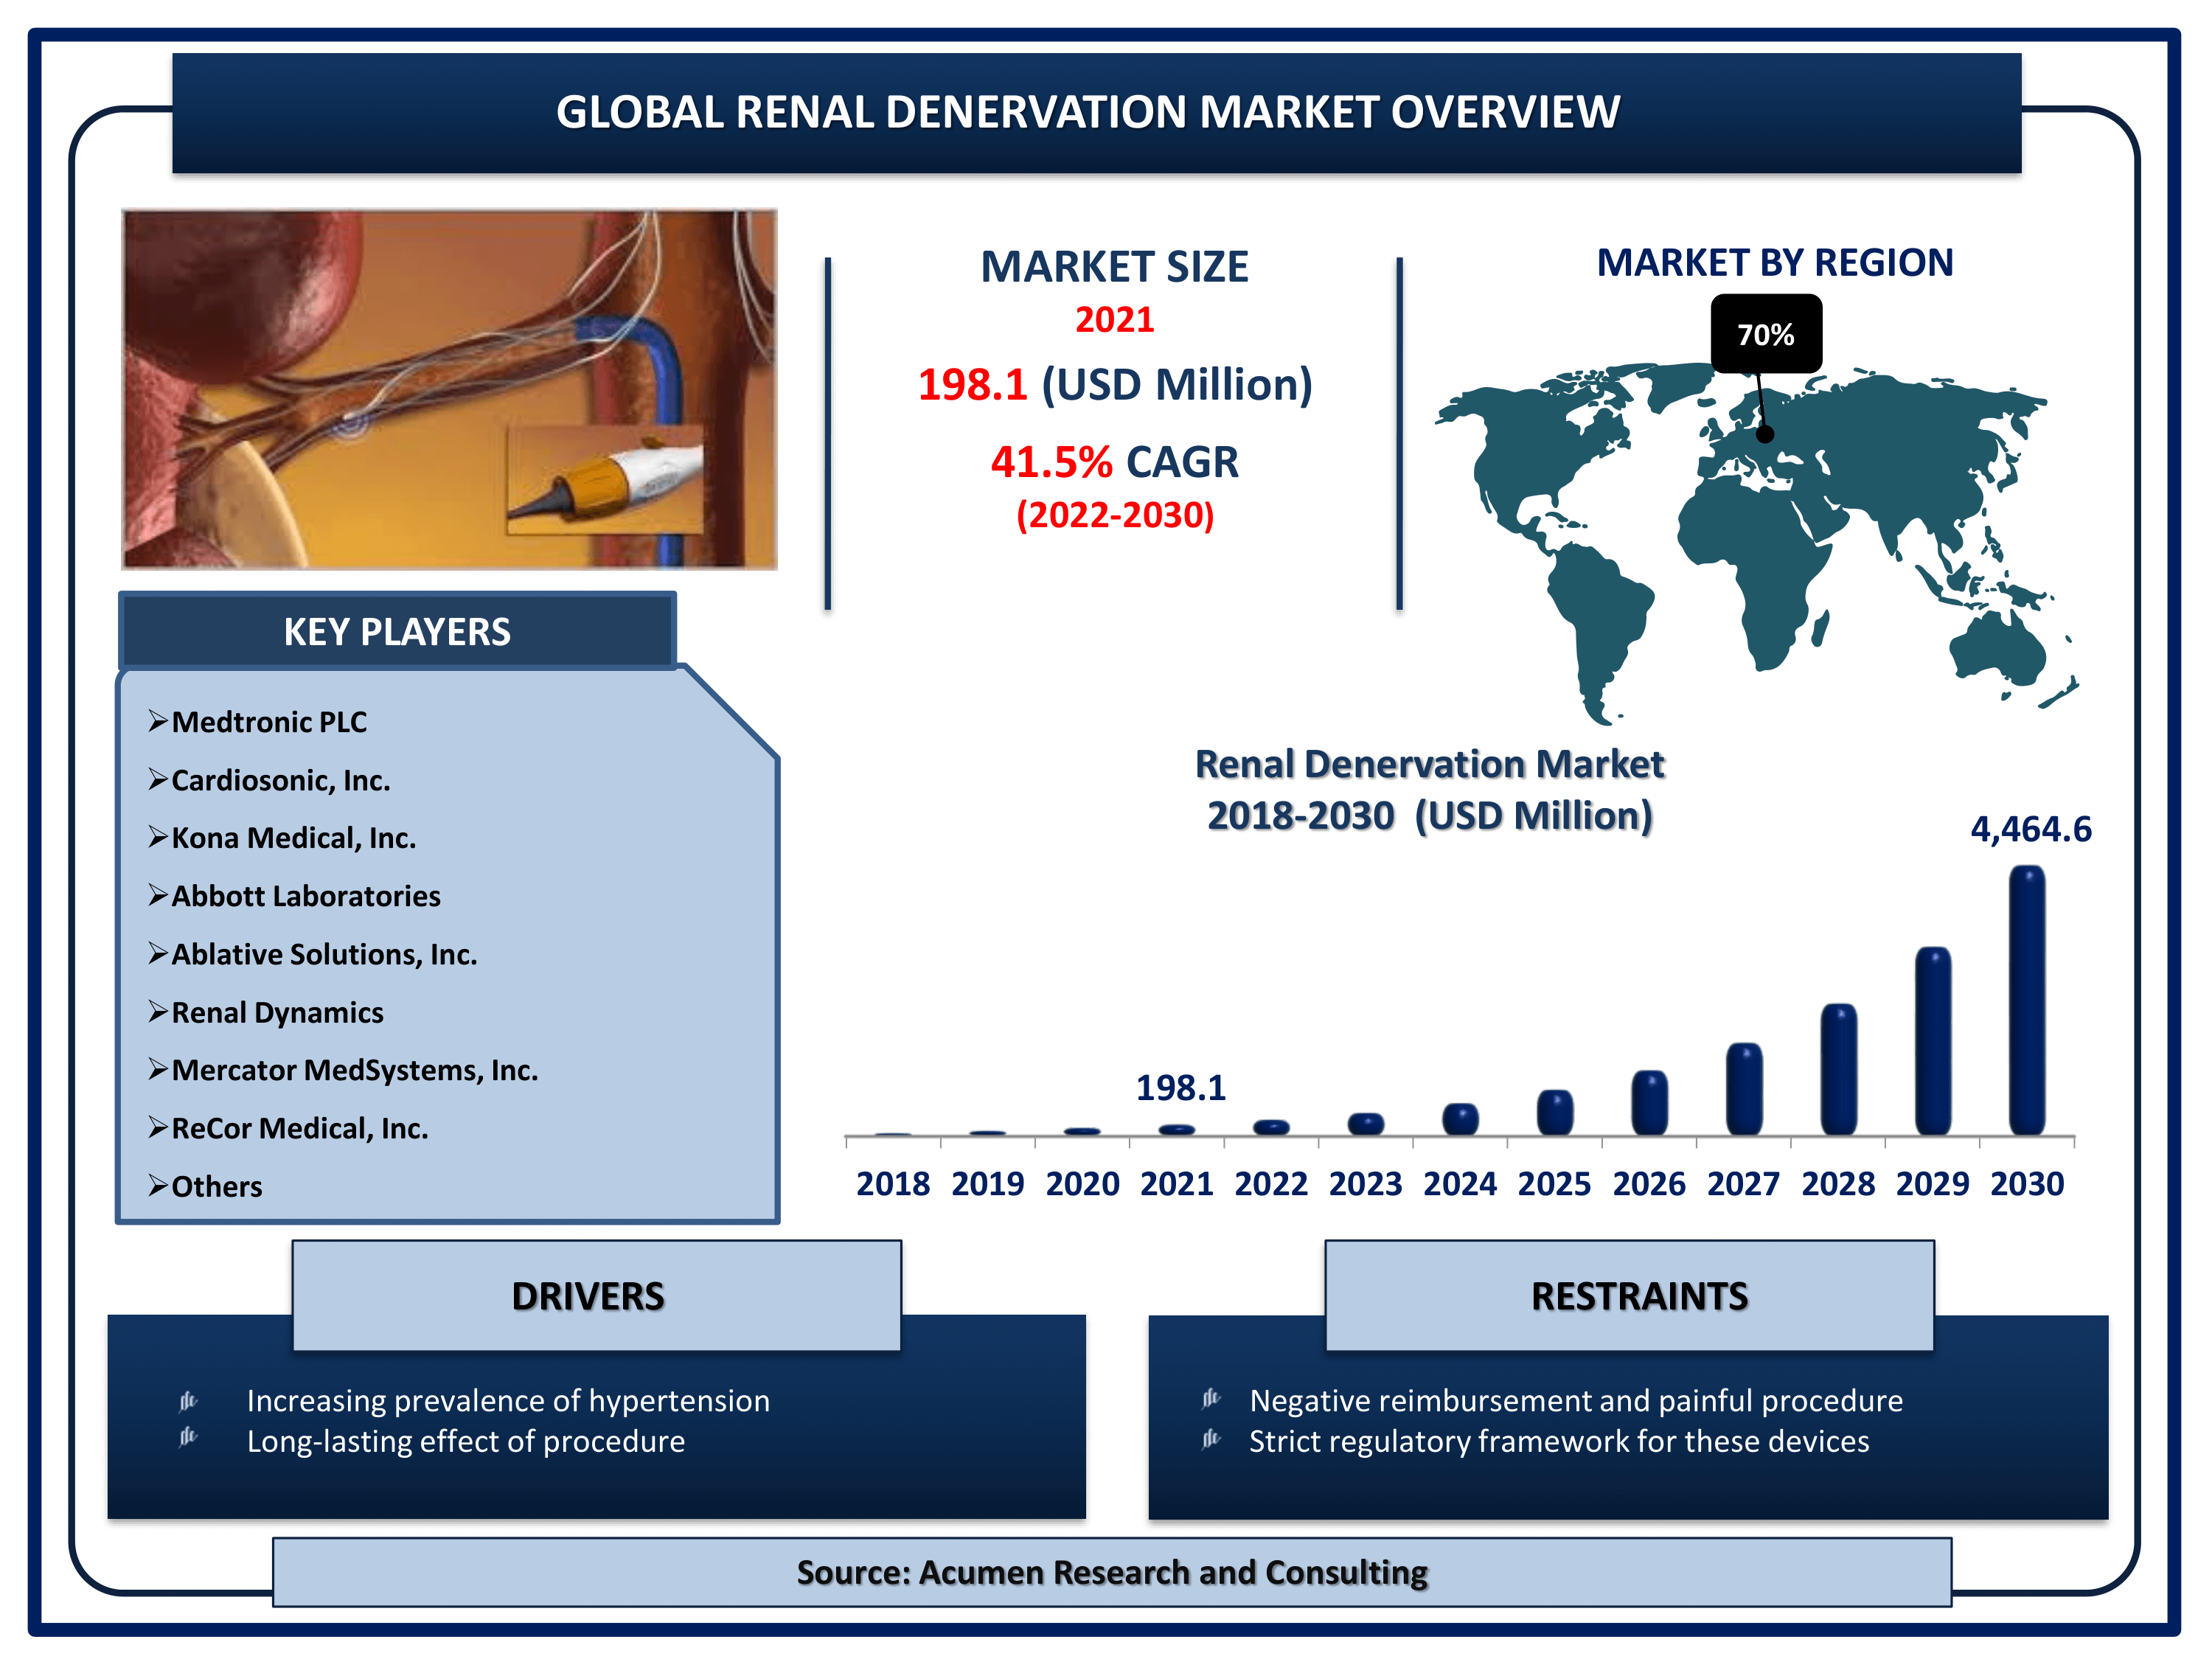 Global renal denervation market revenue is estimated to reach USD 4,464.6 Million by 2030 with a CAGR of 41.5% from 2022 to 2030